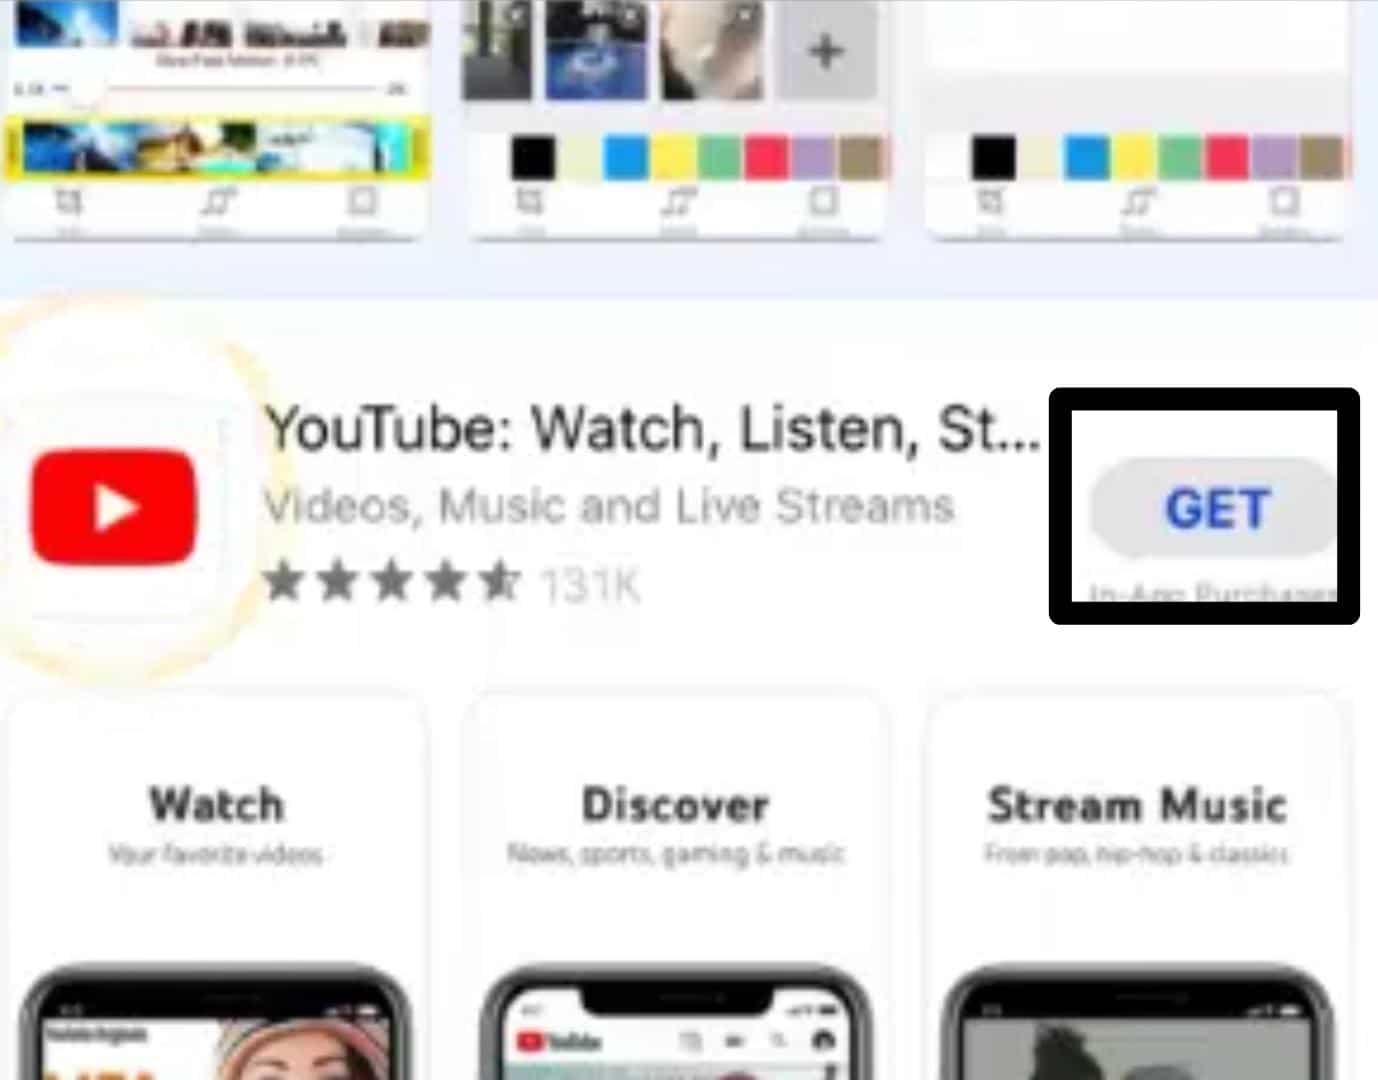 Reinstall the YouTube app to fix YouTube scrolling lag or glitch